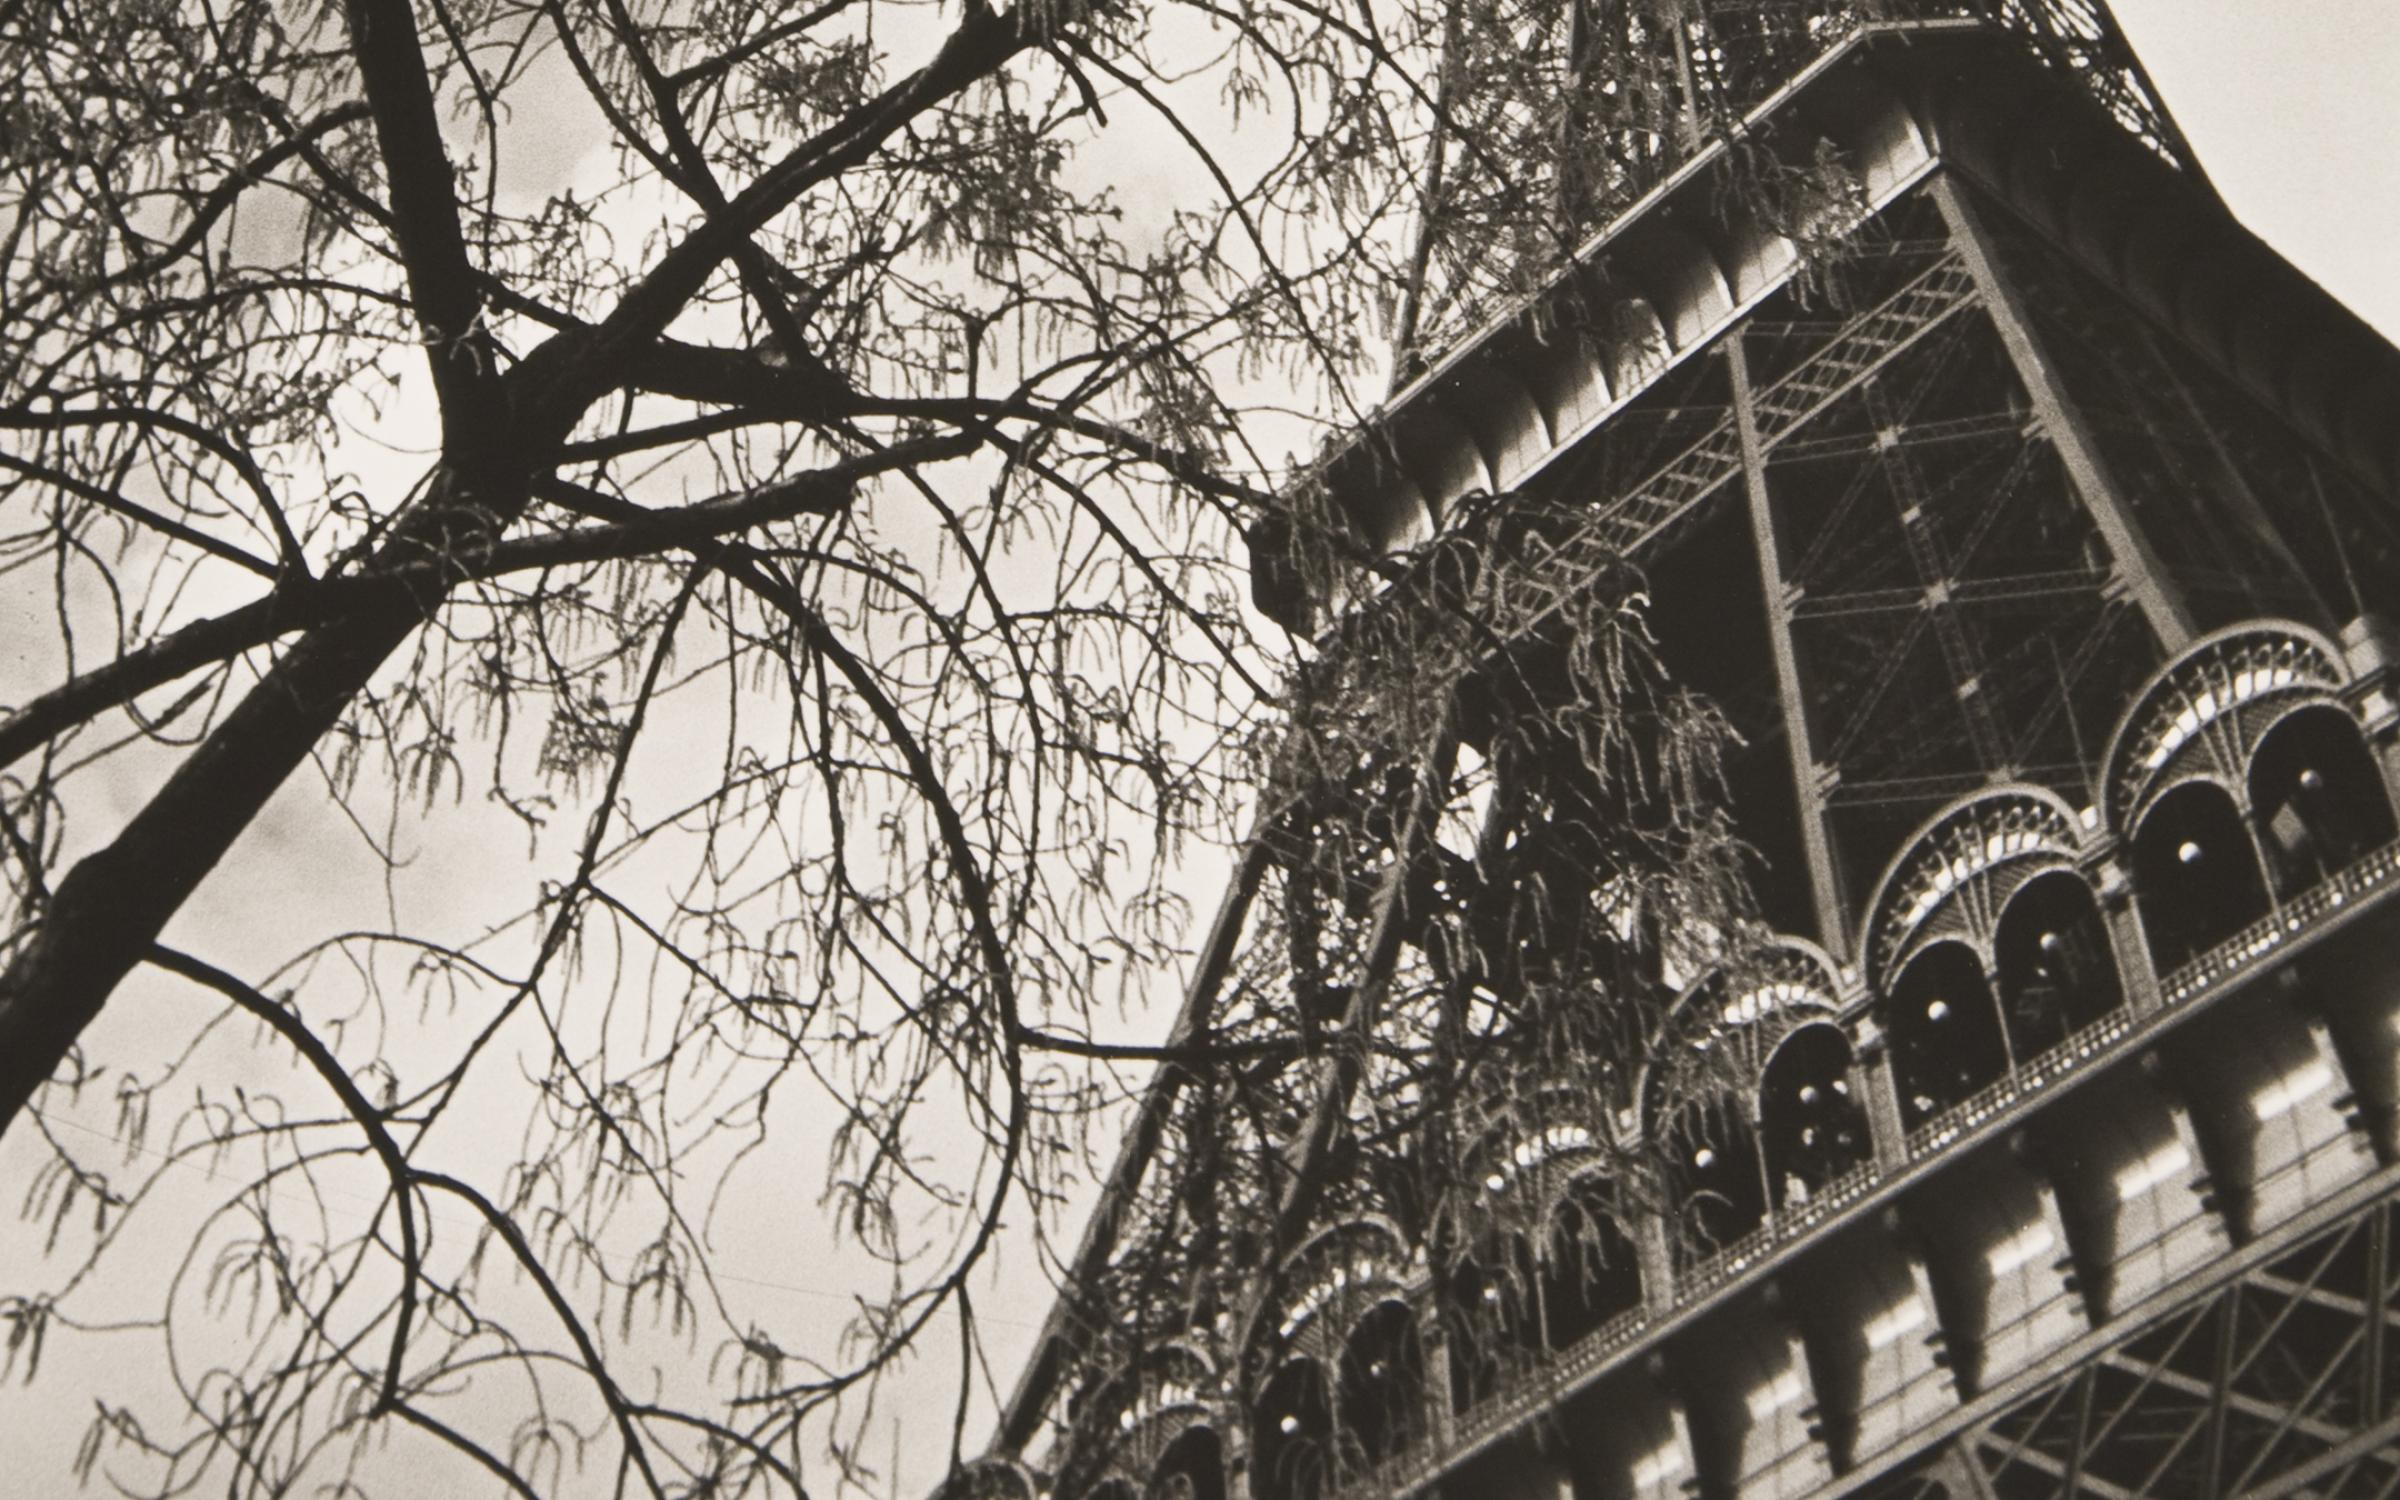 Ilse Bing (German, 1899-1998), Paris, Eiffel Tower with Branches, 1933, printed 1993, gelatin silver print, 13 7/16 in x w: 8 15/16 inches, gift of Dr. Steven K. and Yasemin Miller, UMFA2012.11.8.